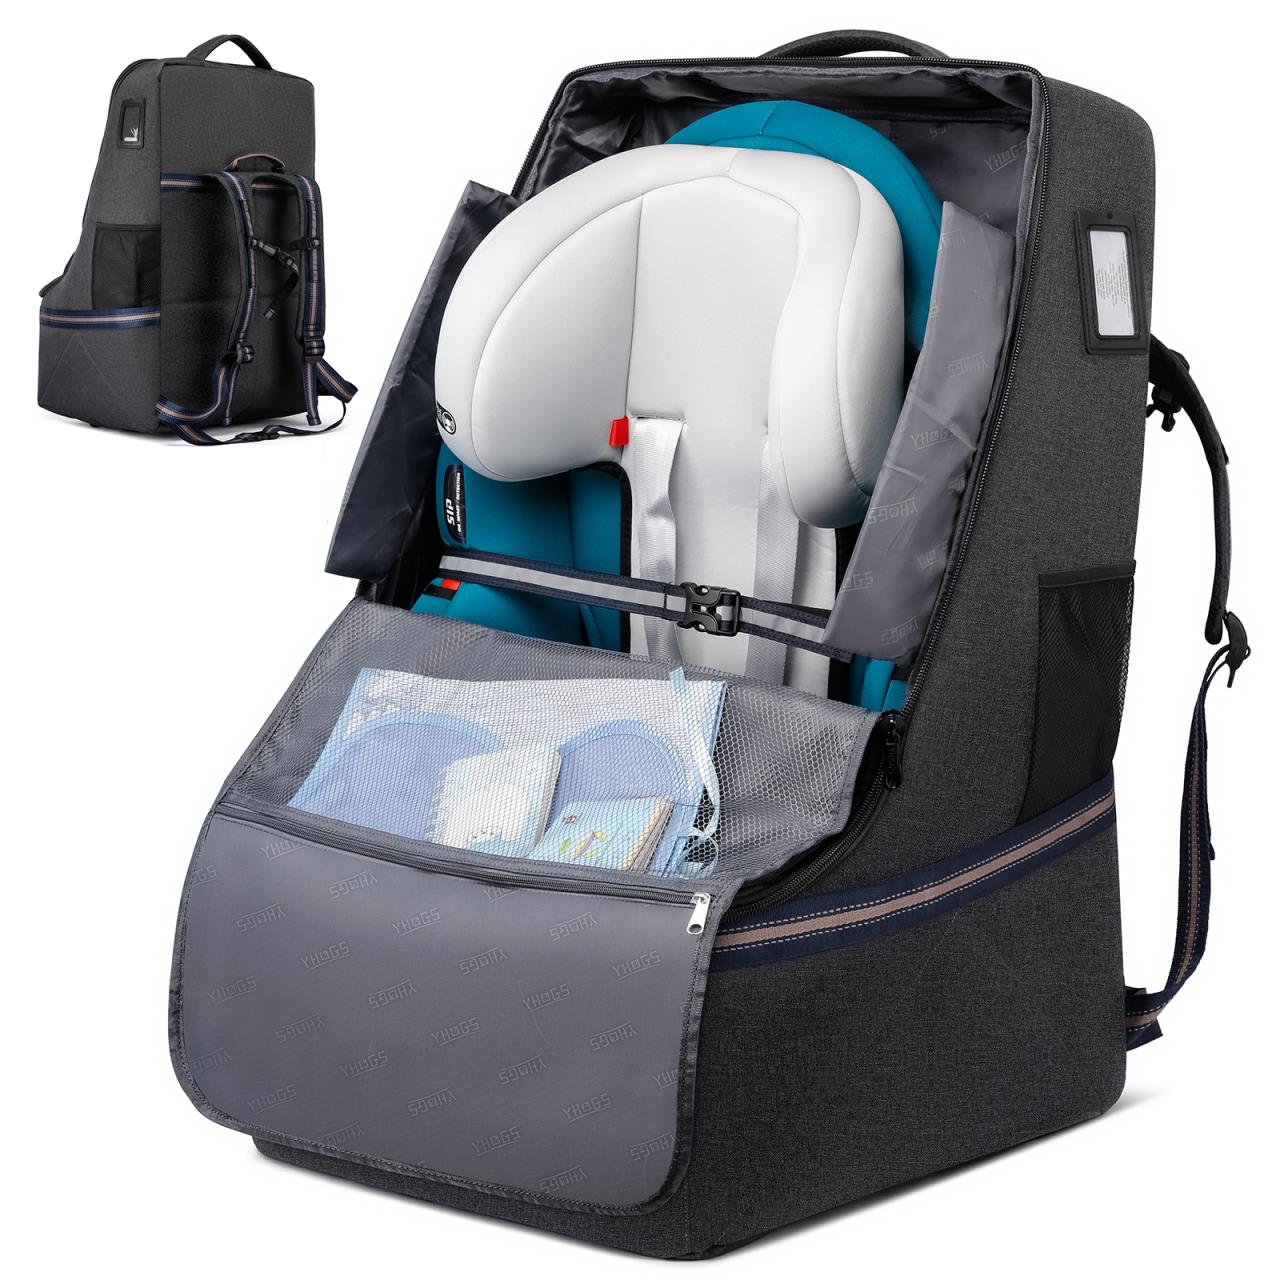 Car seat Backpack for air travel |Car seat travel bag for airplane |Car  seat travel bag, Padded car seat travel bag | Airport Gate Check Bag  |Travel